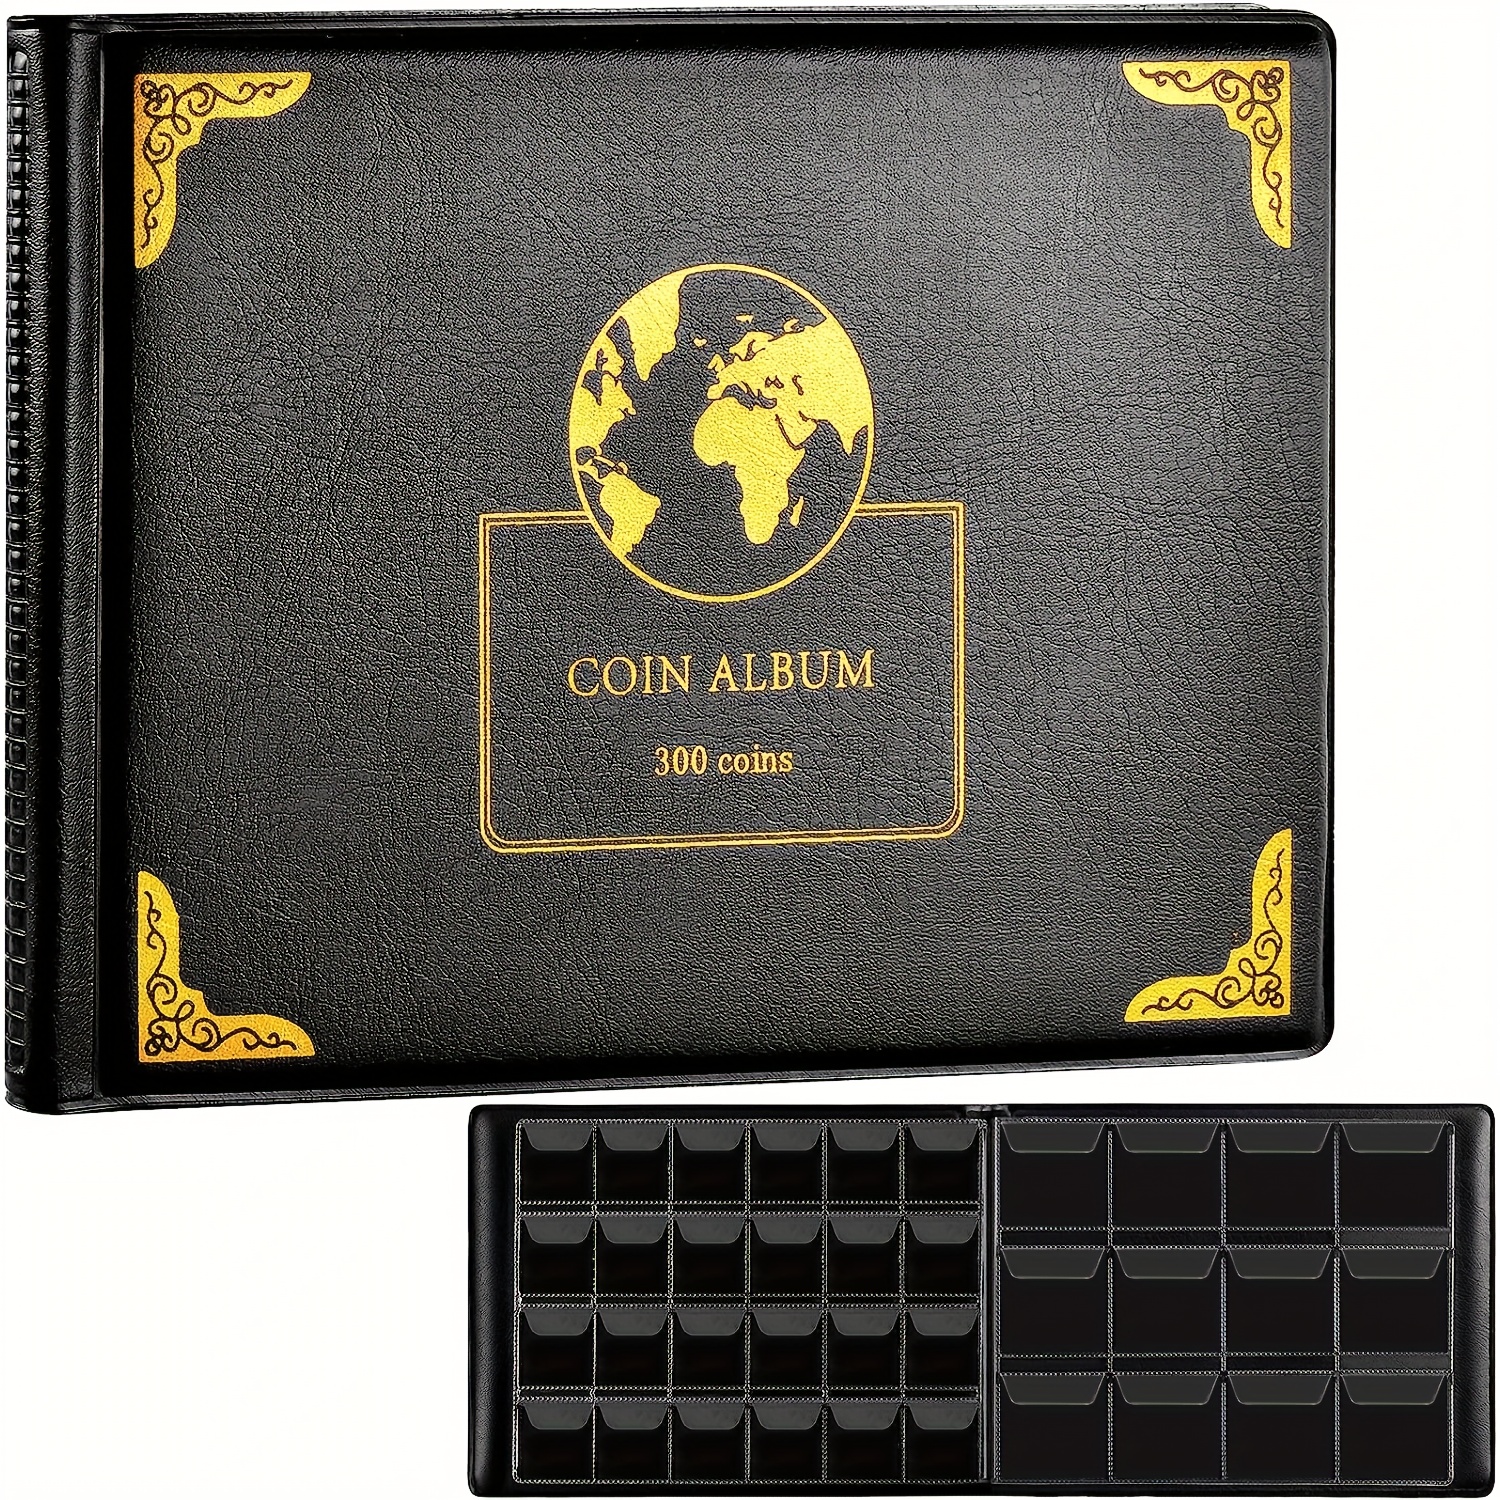 Coin Collection Supplies Pages for Collectors, 12 Sheets Coins Holder Album  Book Sleeves, Collecting Binder Protectors for Silver Dollar Bill Quarters  Penny Stamp Currency (42 Pockets) 